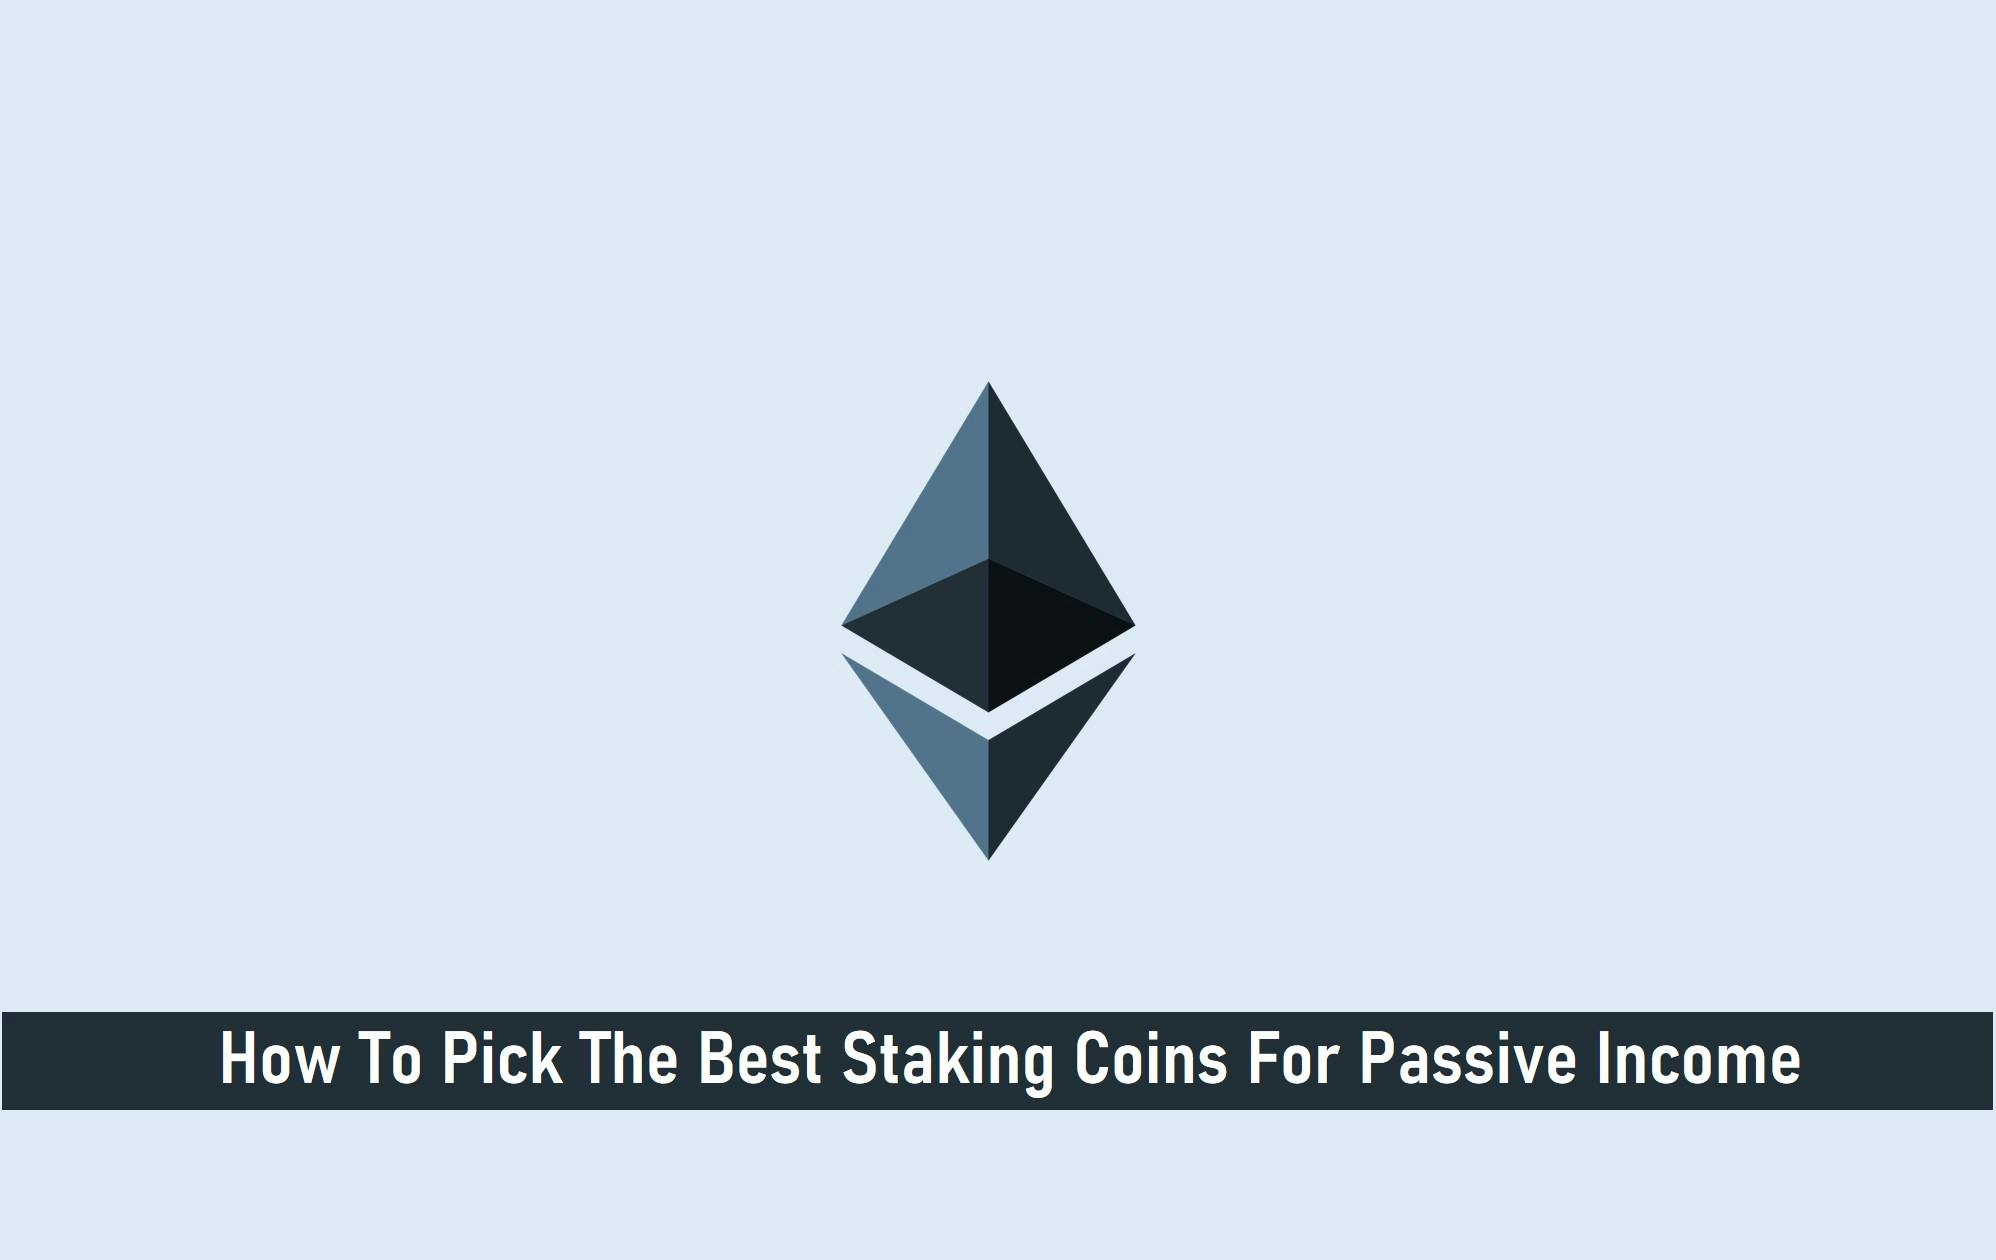 How To Pick the Best Staking Coins For Passive Income